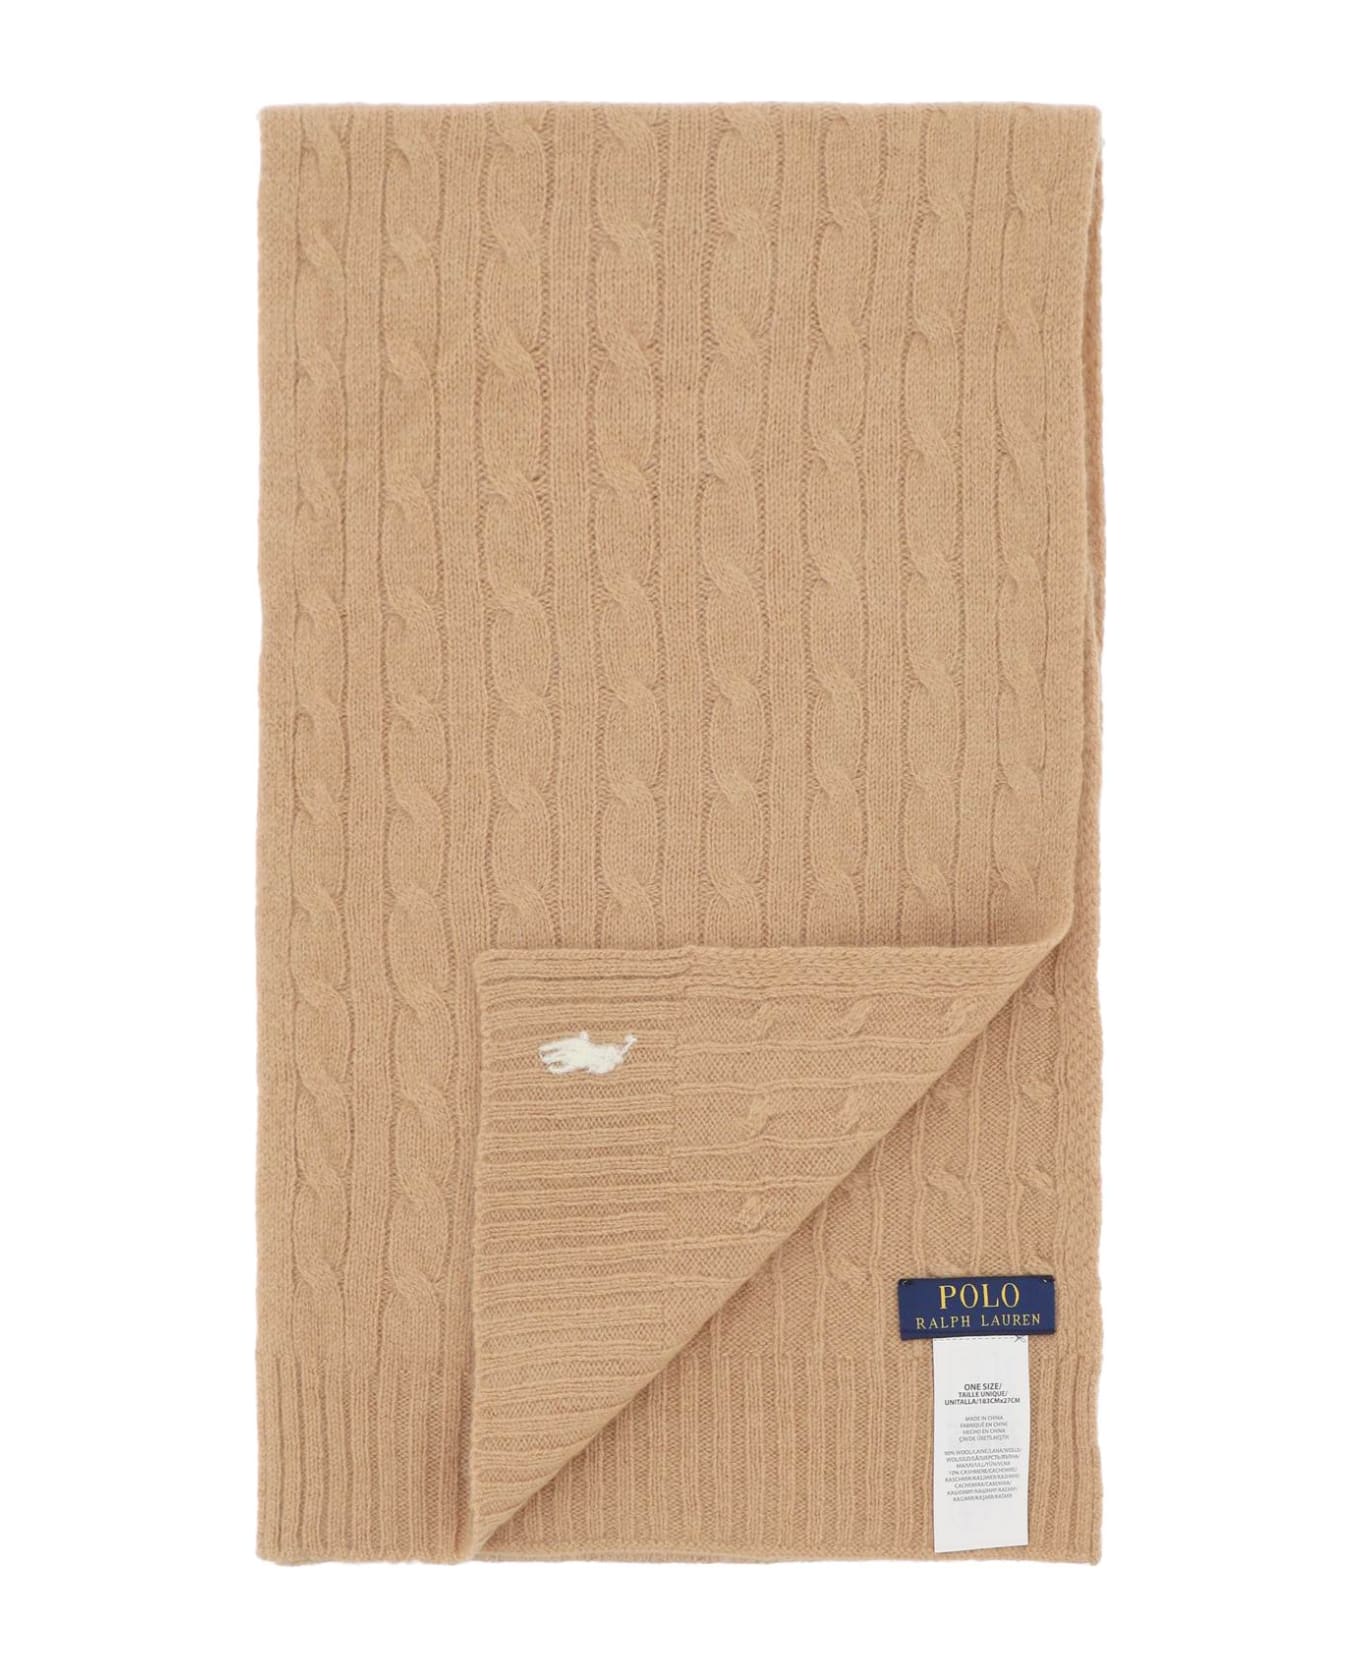 Polo Ralph Lauren Wool And Cashmere Cable-knit Scarf - CAMEL (Beige) スカーフ＆ストール